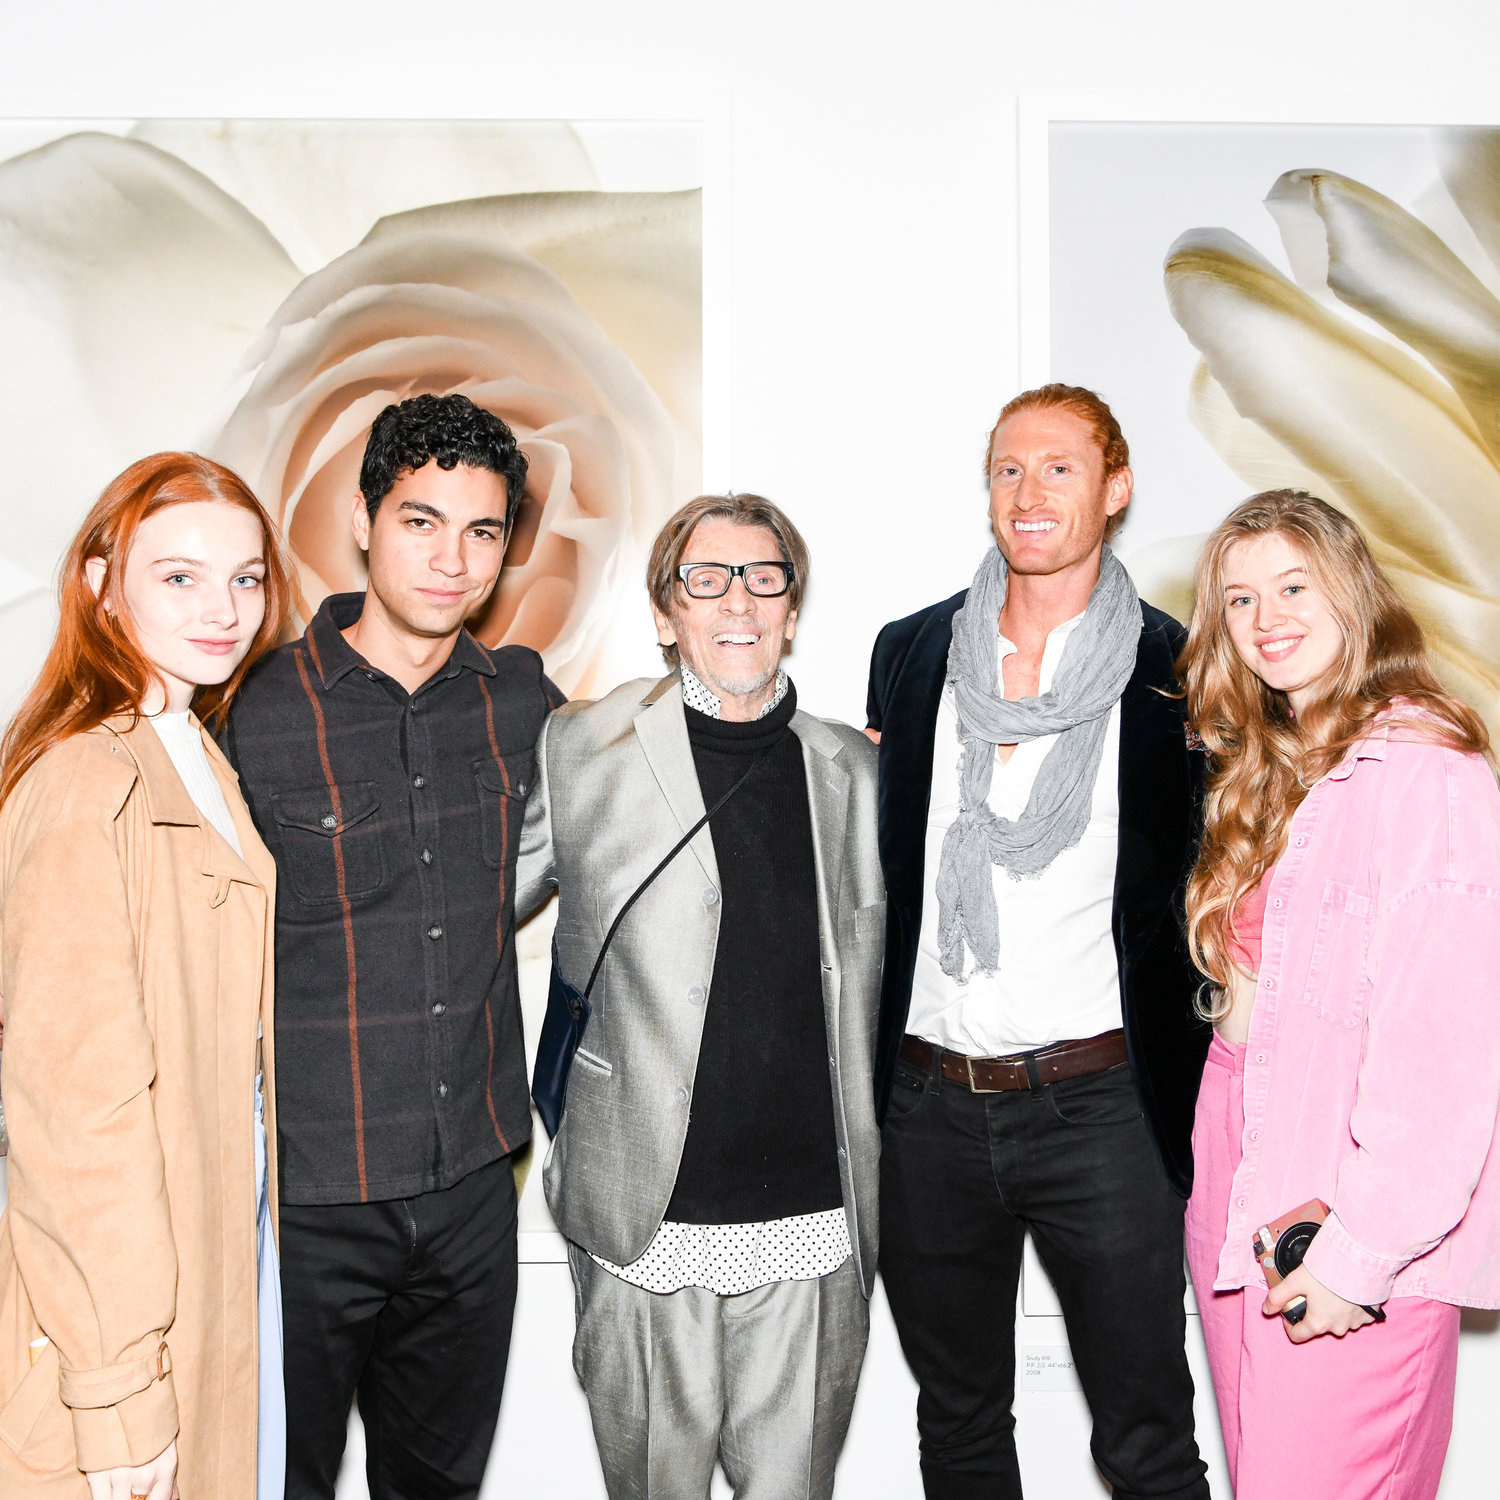 The opening of "Andy in Nature," celebrating Andy Warhol's connection to the natural world, was called "a glorious, high-energy evening.” Pictured are Caroline Hahn, left; Davi Santos; Christopher Makos; Brian Persico; and Marina Golubeva.